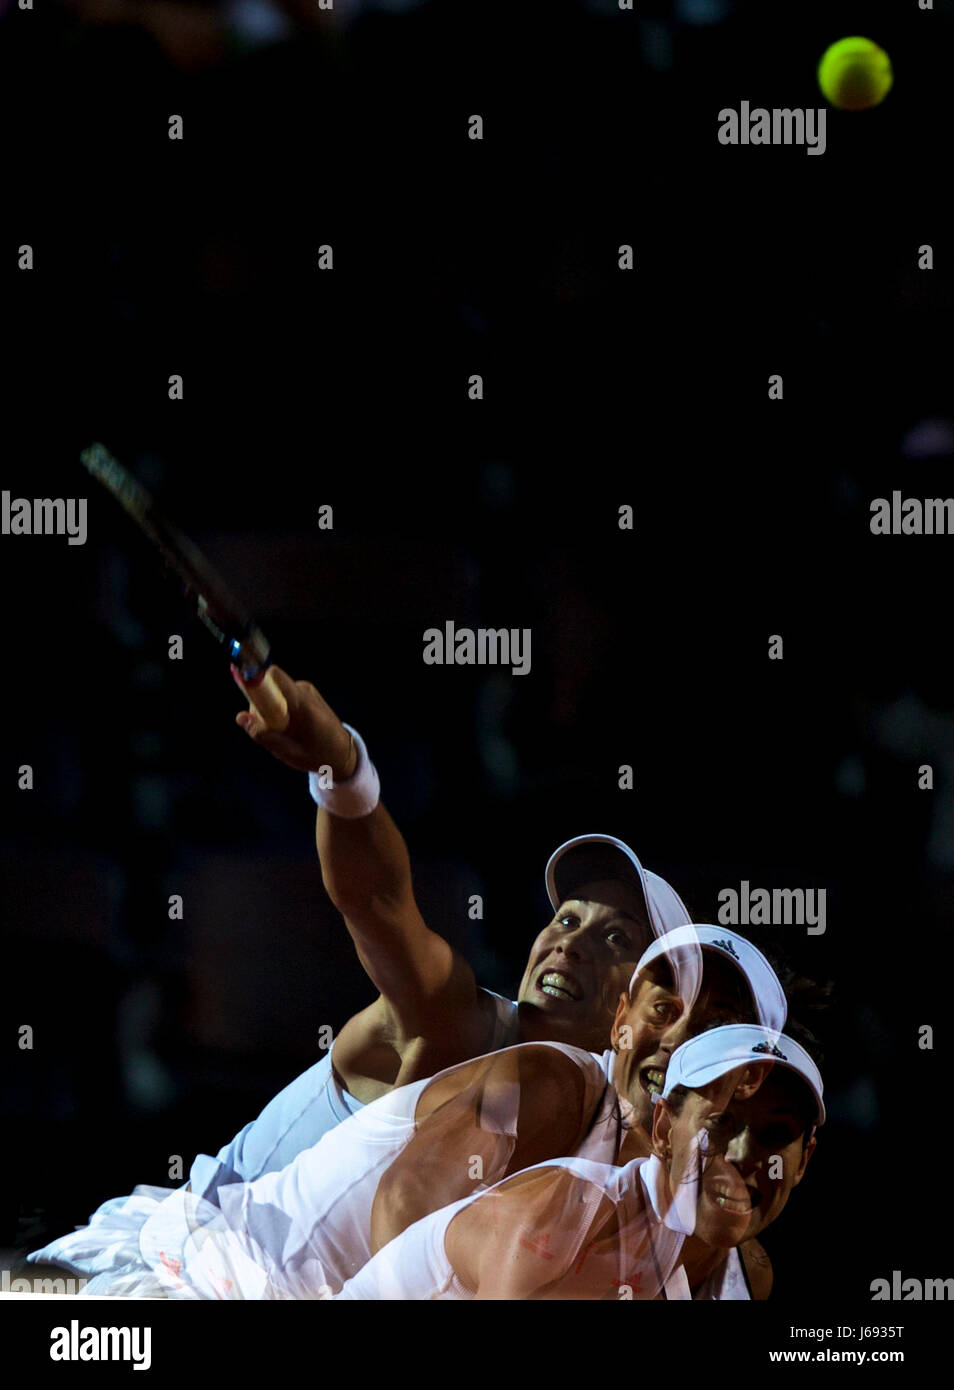 Rome, Italy. 19th May, 2017. This multi-exposure photo shows Garbine Muguruza of Spain serving to Venus Williams of the United States during their quarterfinal match of women's singles at the Italian Open tennis tournament in Rome, Italy, May 19, 2017. Muguruza won 2-1. Credit: Jin Yu/Xinhua/Alamy Live News Stock Photo